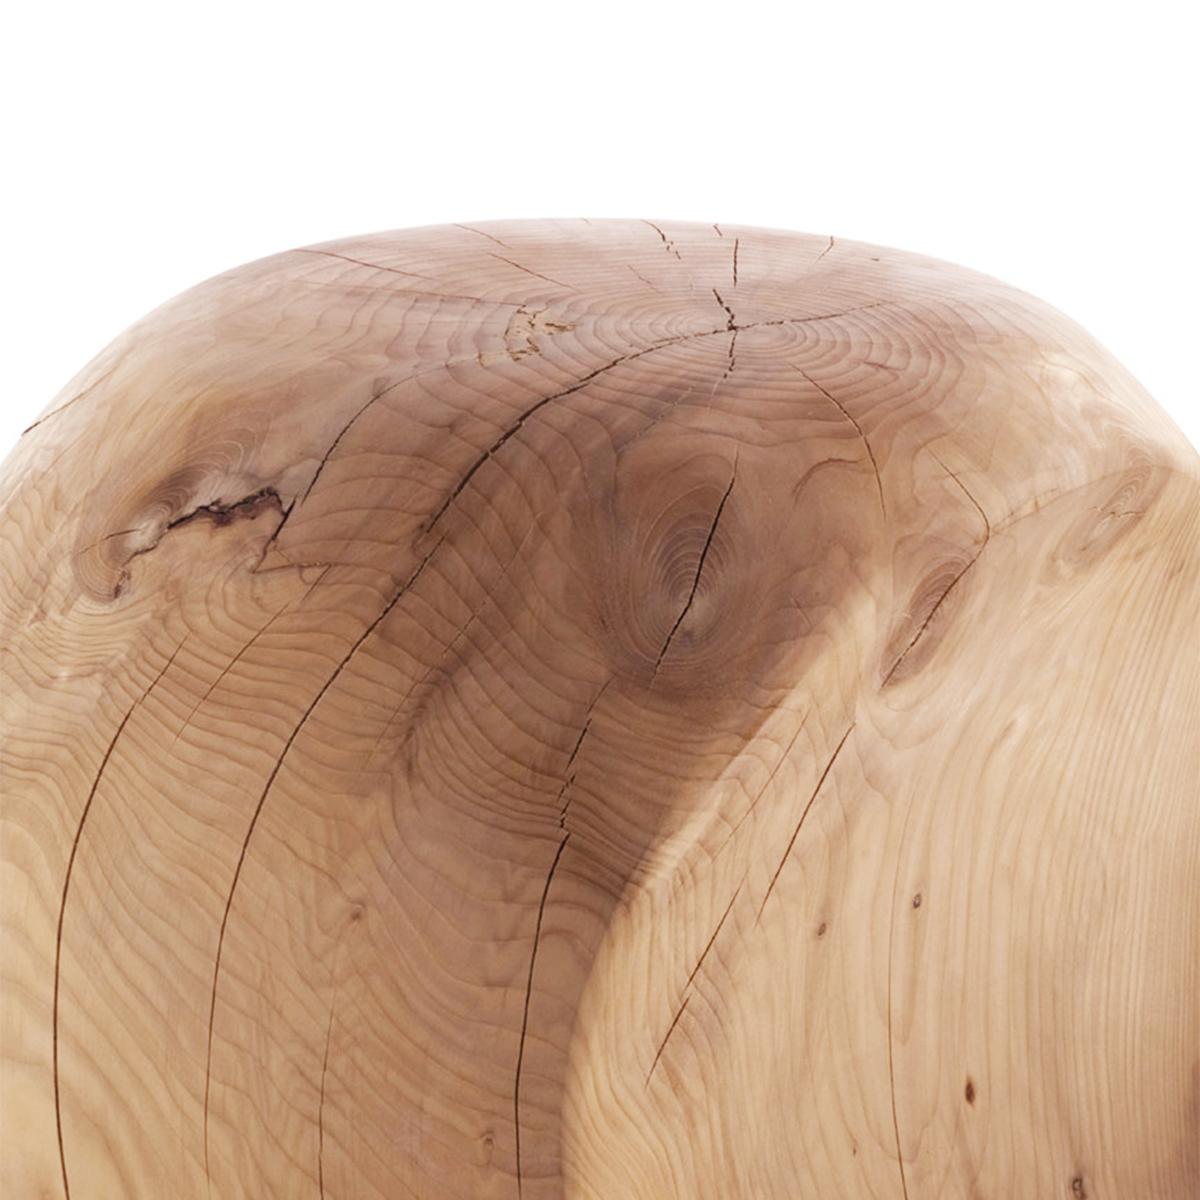 Stool Cocoona shape 2 in solid natural aromatic
cedar wood. Made in one block of cedar wood.
Treated with natural pine extracts.
Can be used in the 3 faces of the stool.
Solid cedar wood include movement, 
cracks and changes in wood conditions,